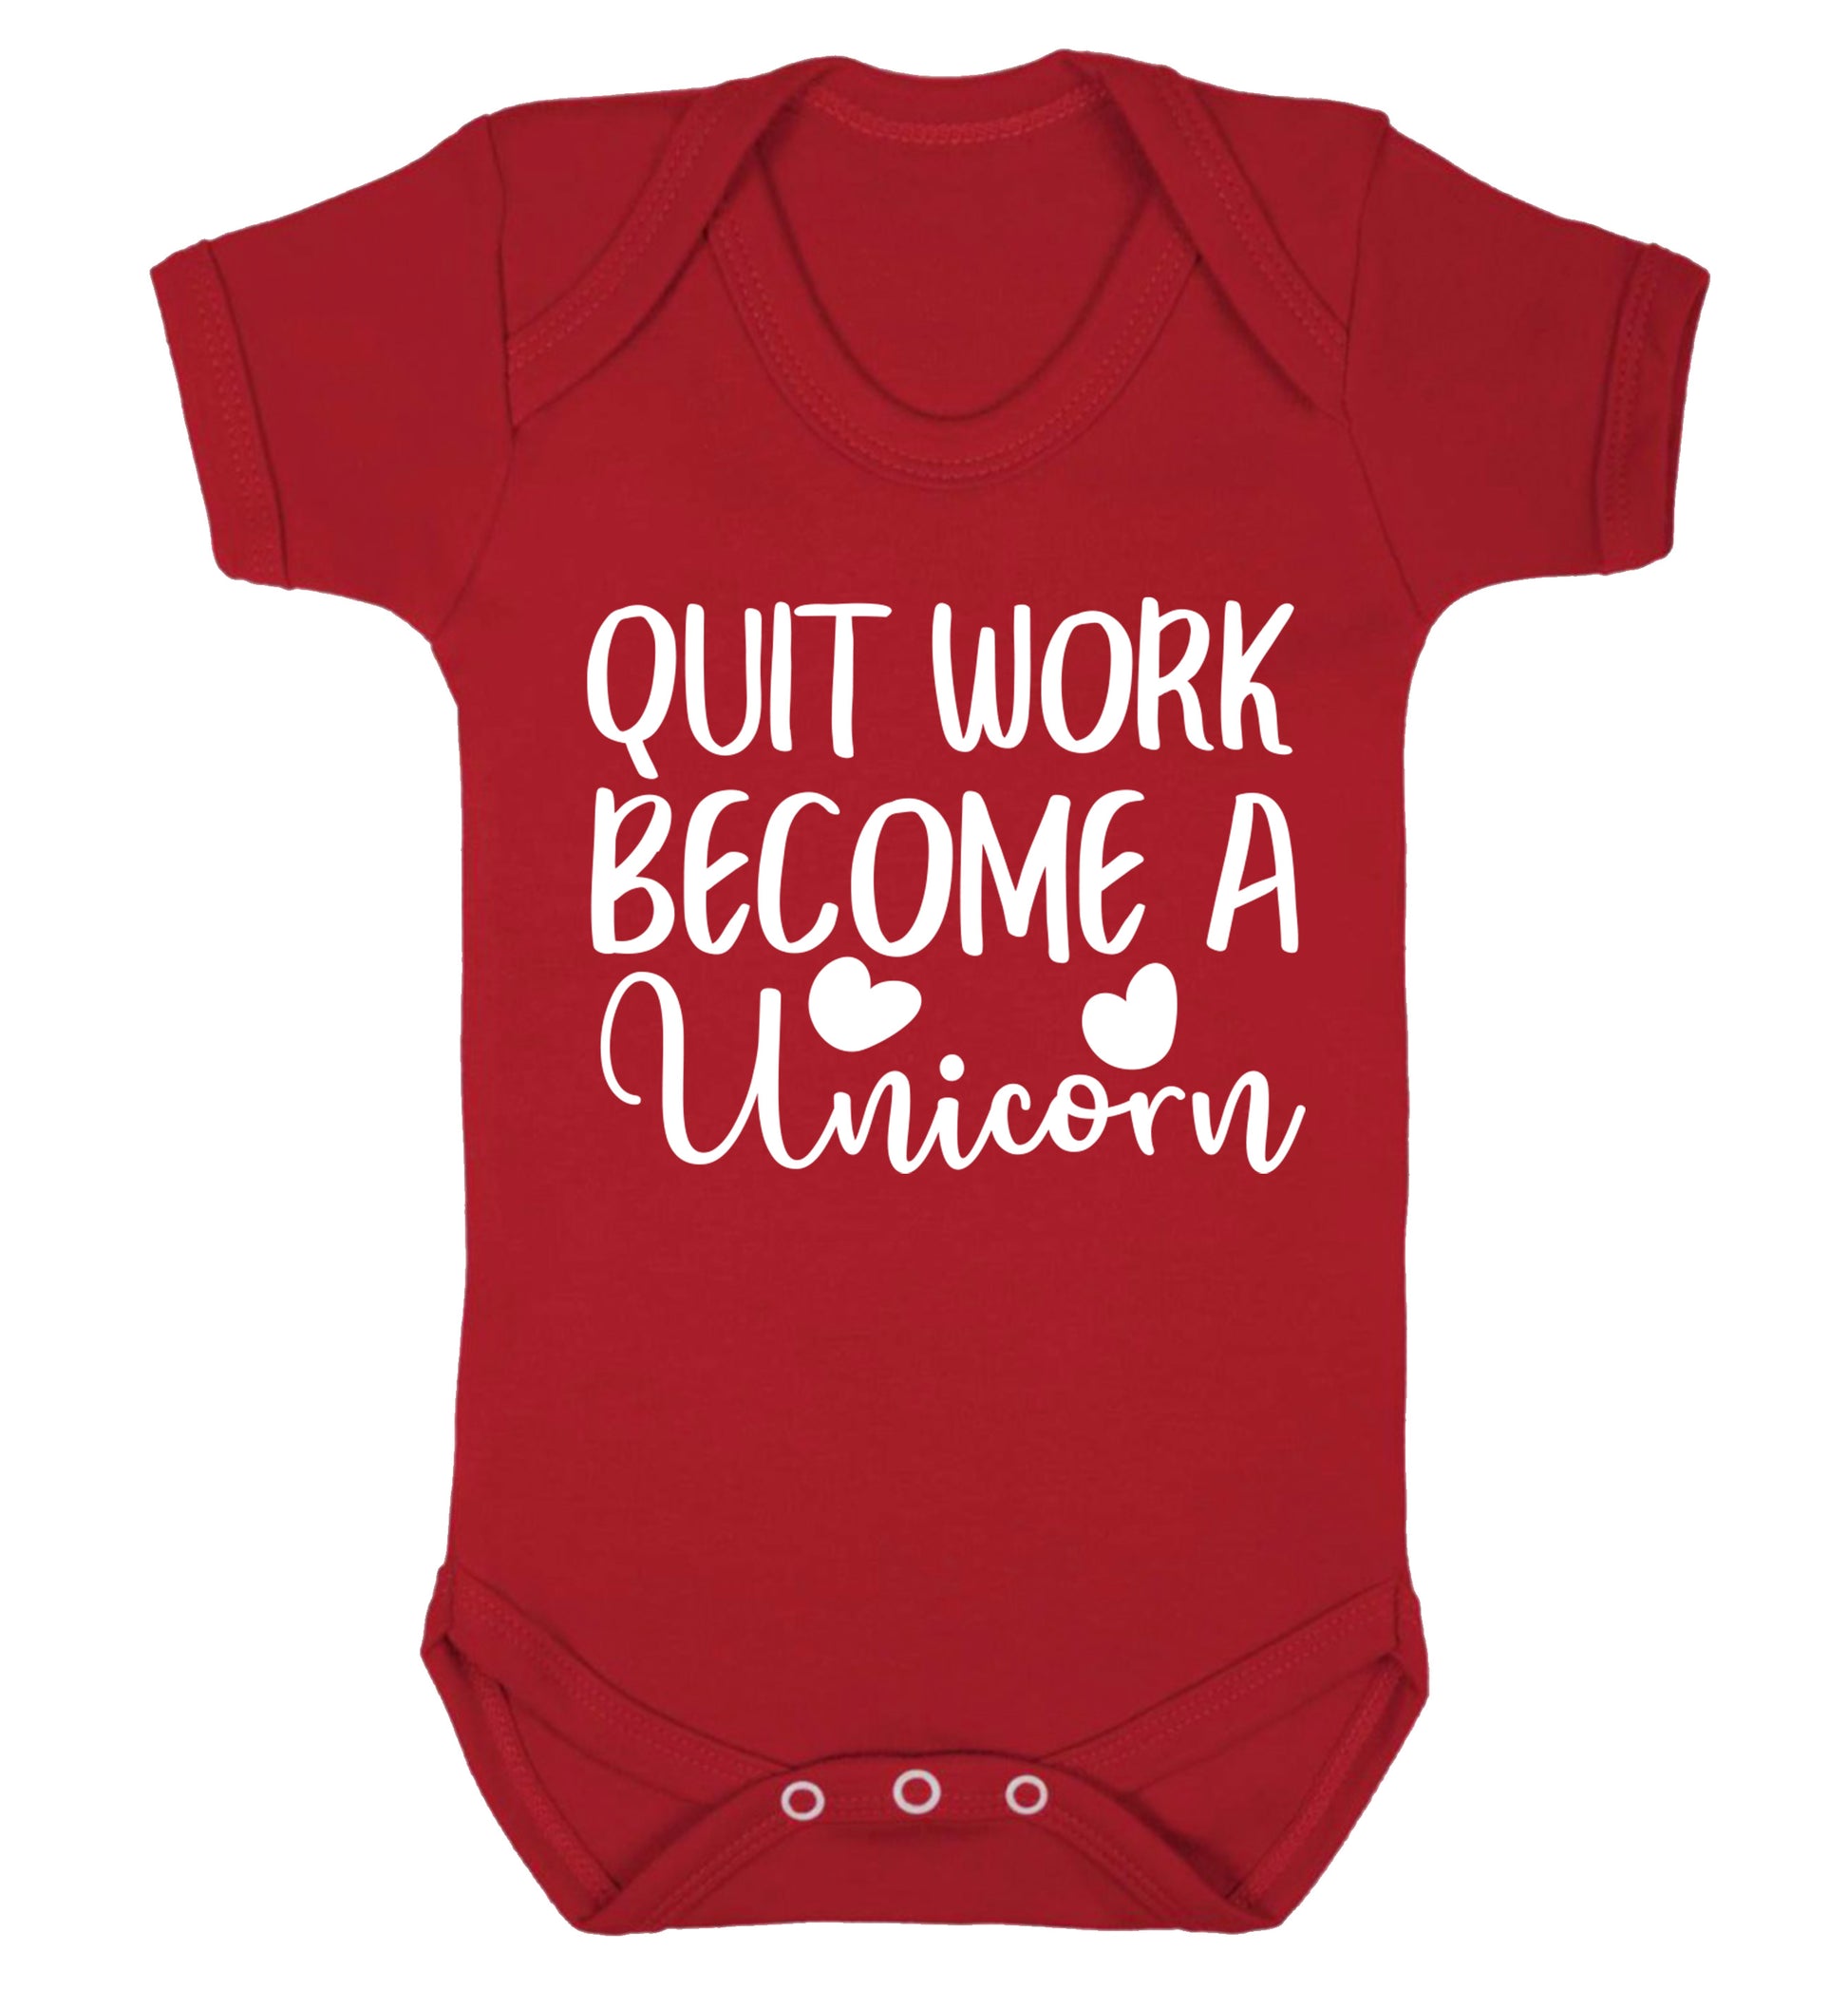 Quit work become a unicorn Baby Vest red 18-24 months